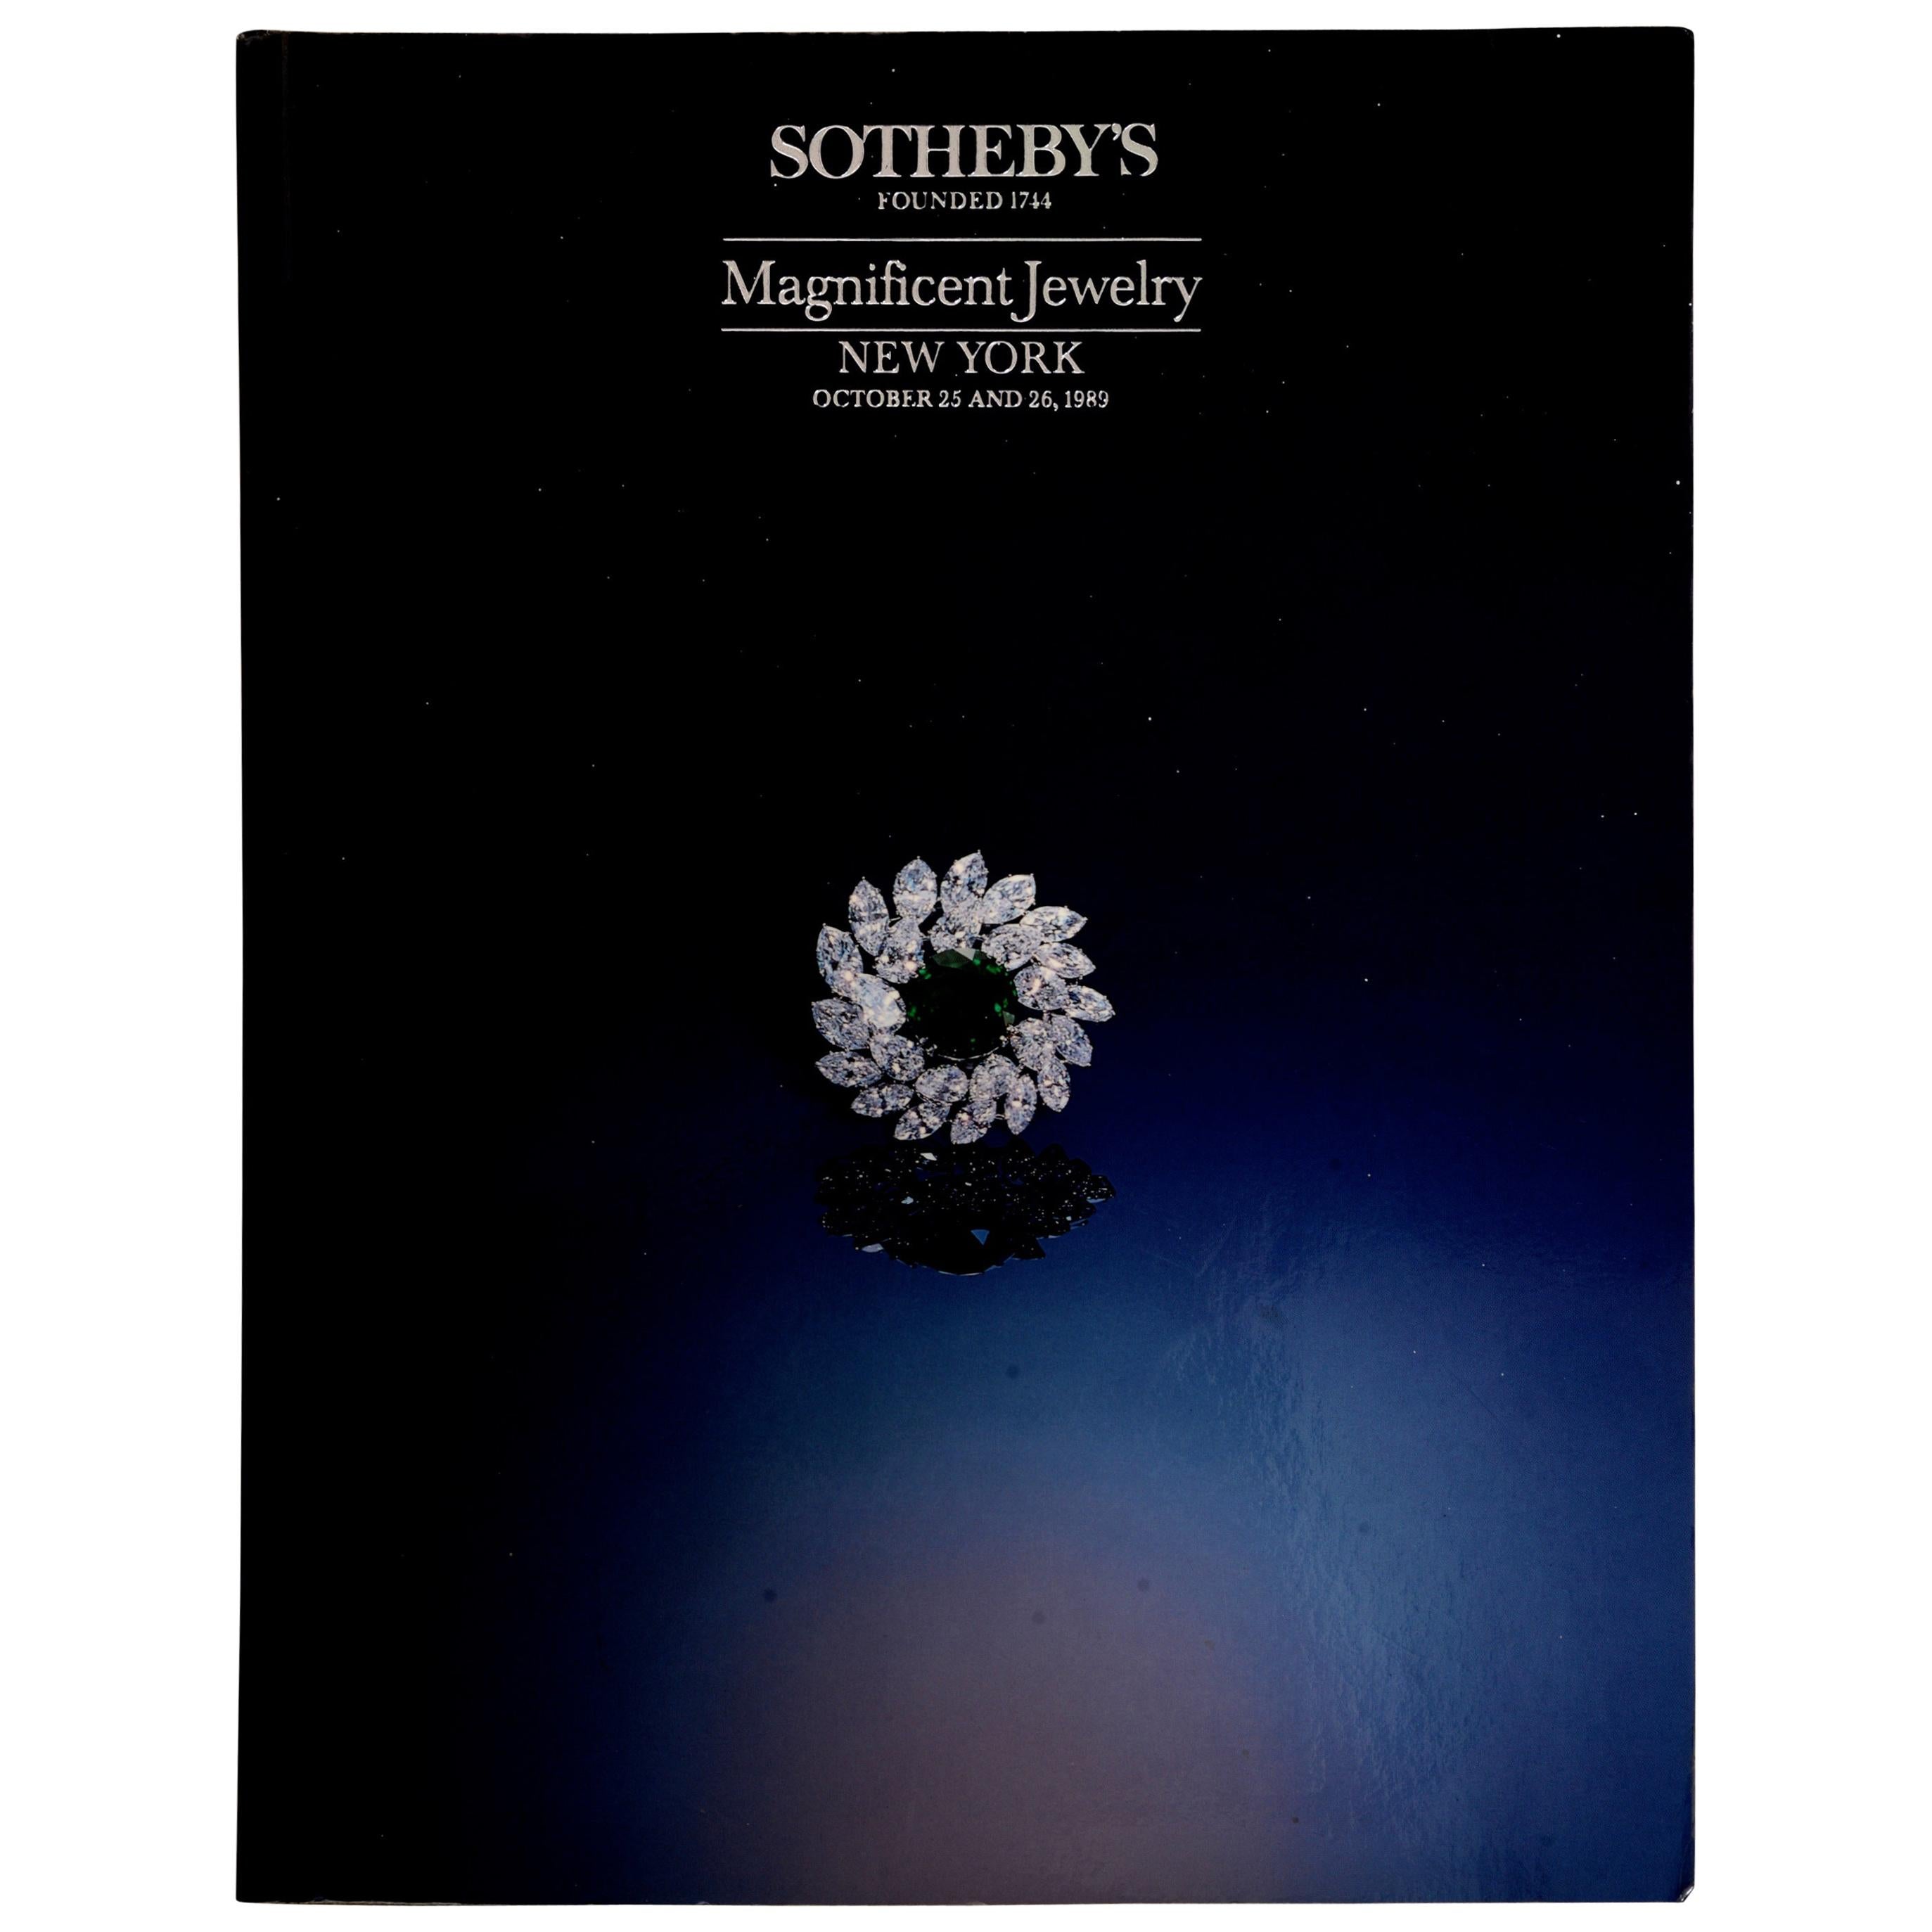 Sotheby's NY Catalog Magnificent Jewels October 25th and 26th, 1989, Sale #5911